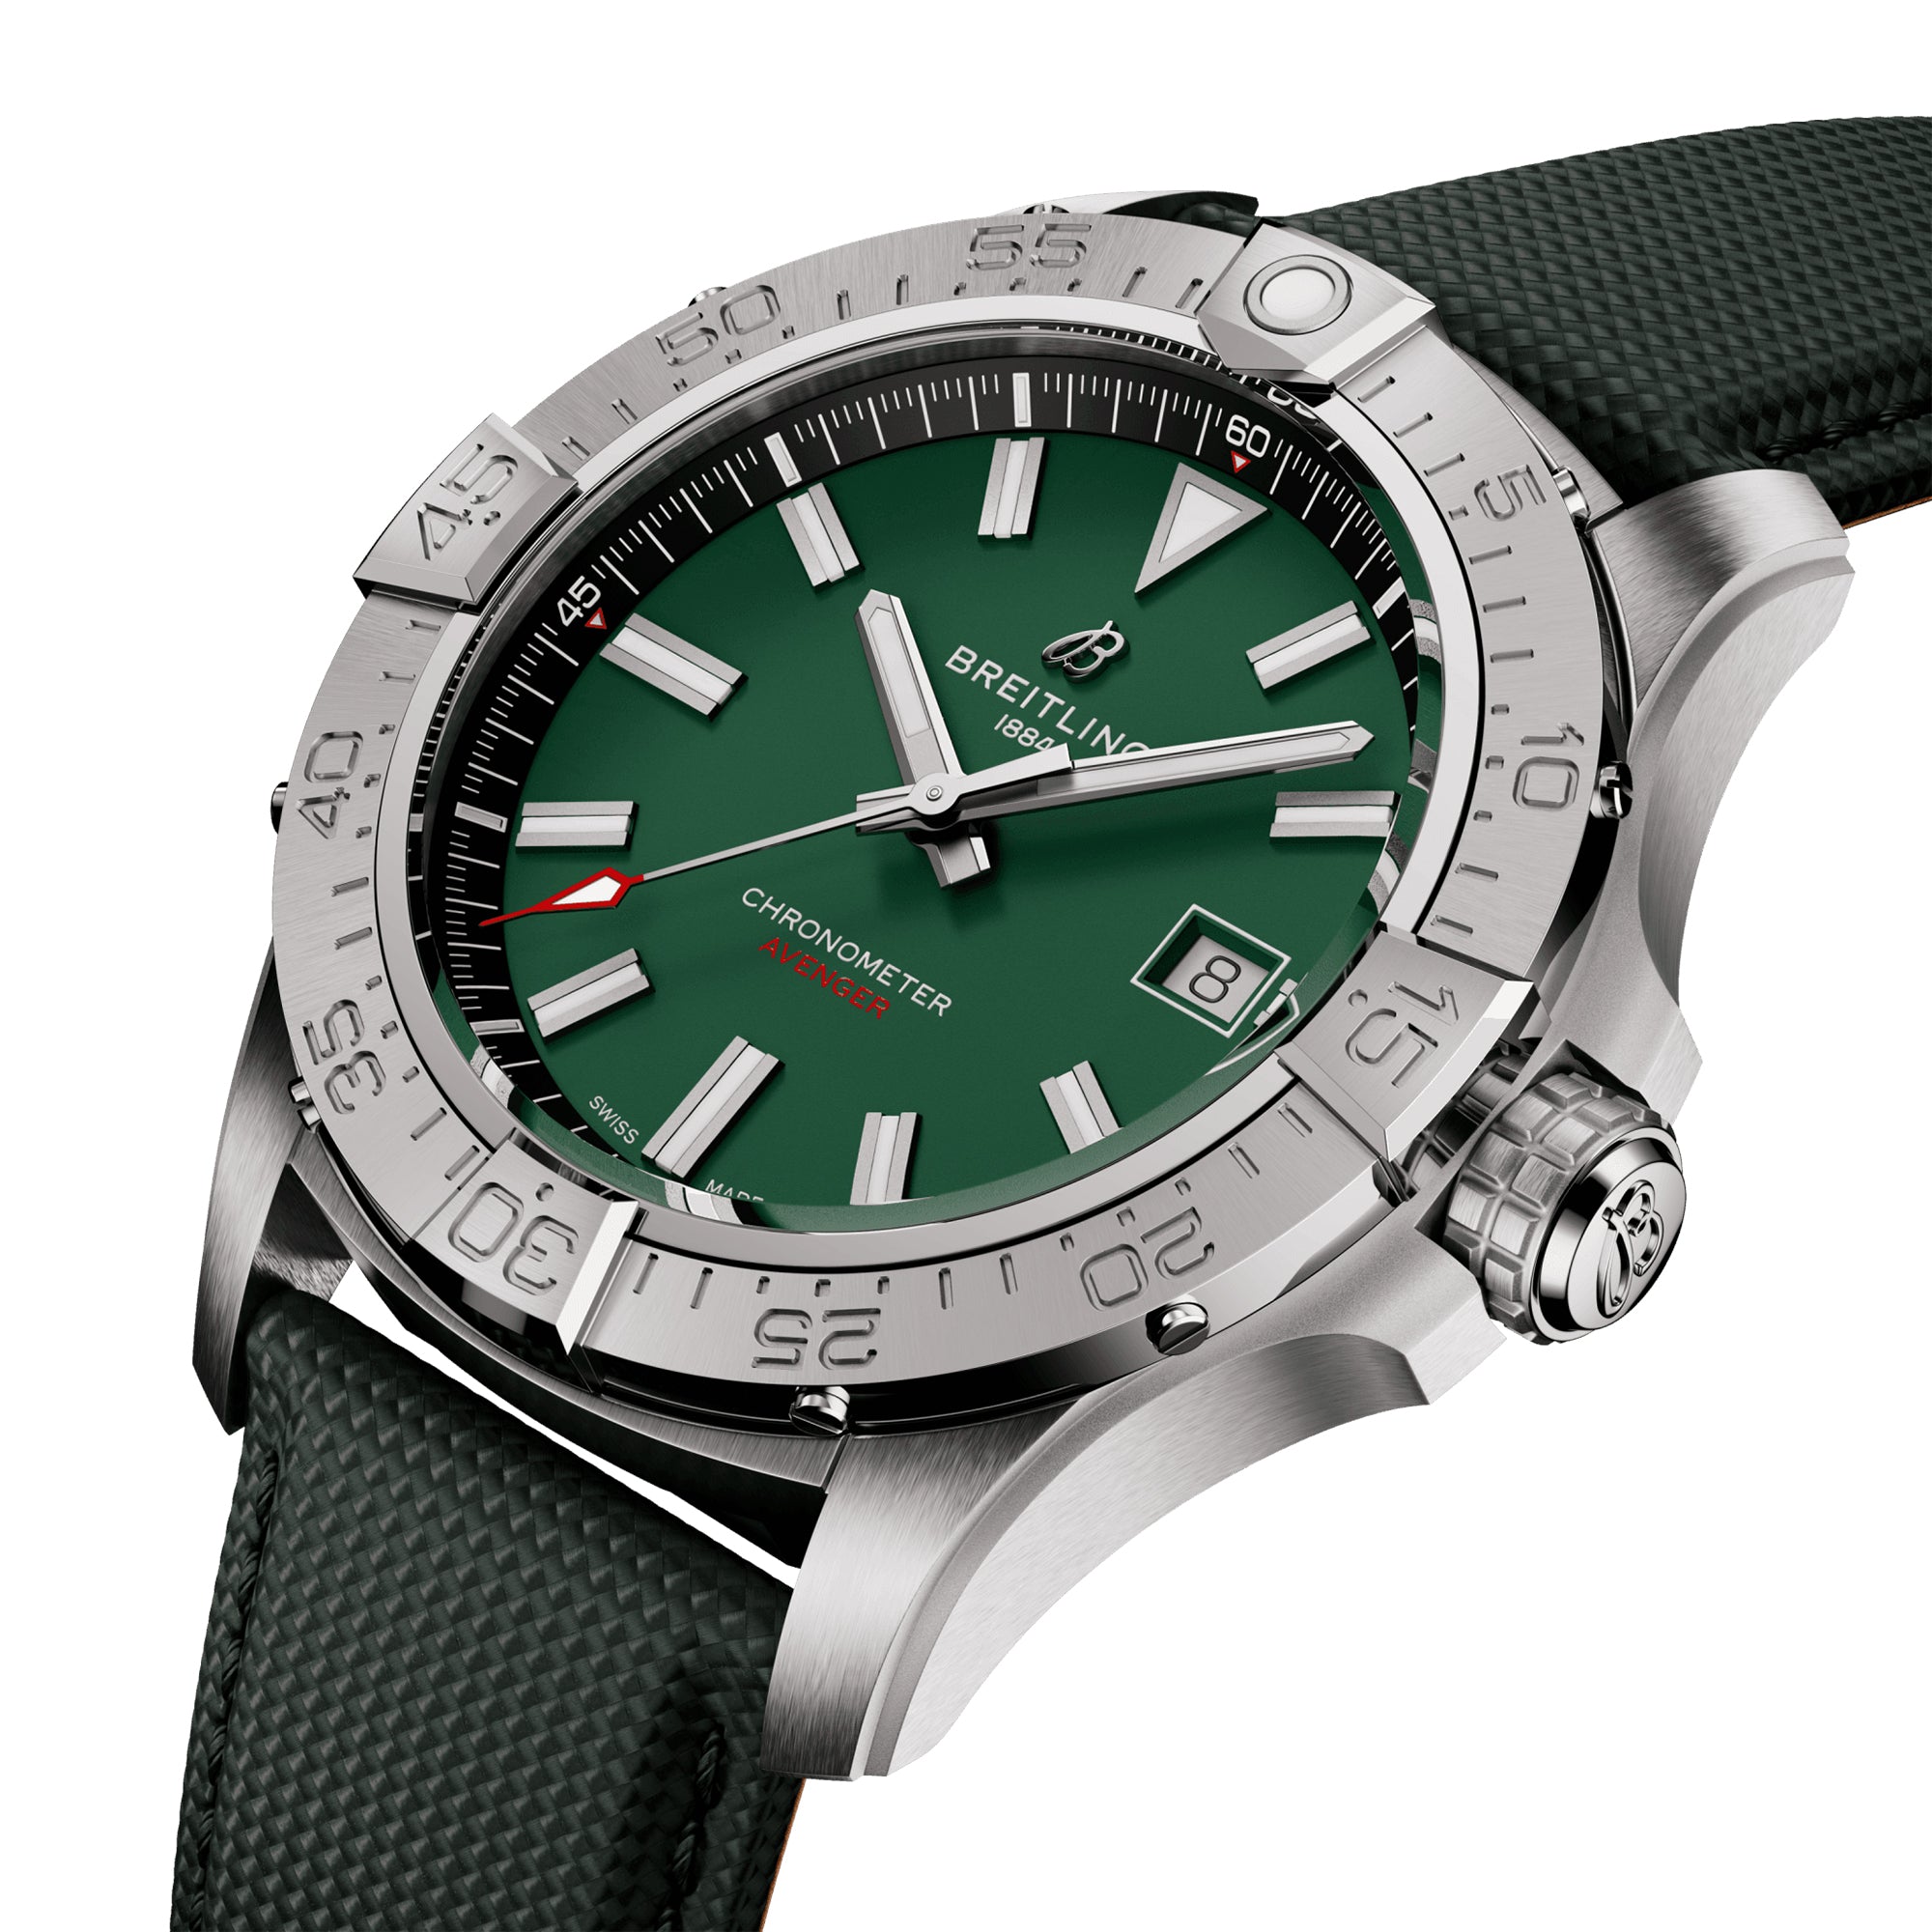 Avenger 42mm Green Dial Automatic Strap Watch